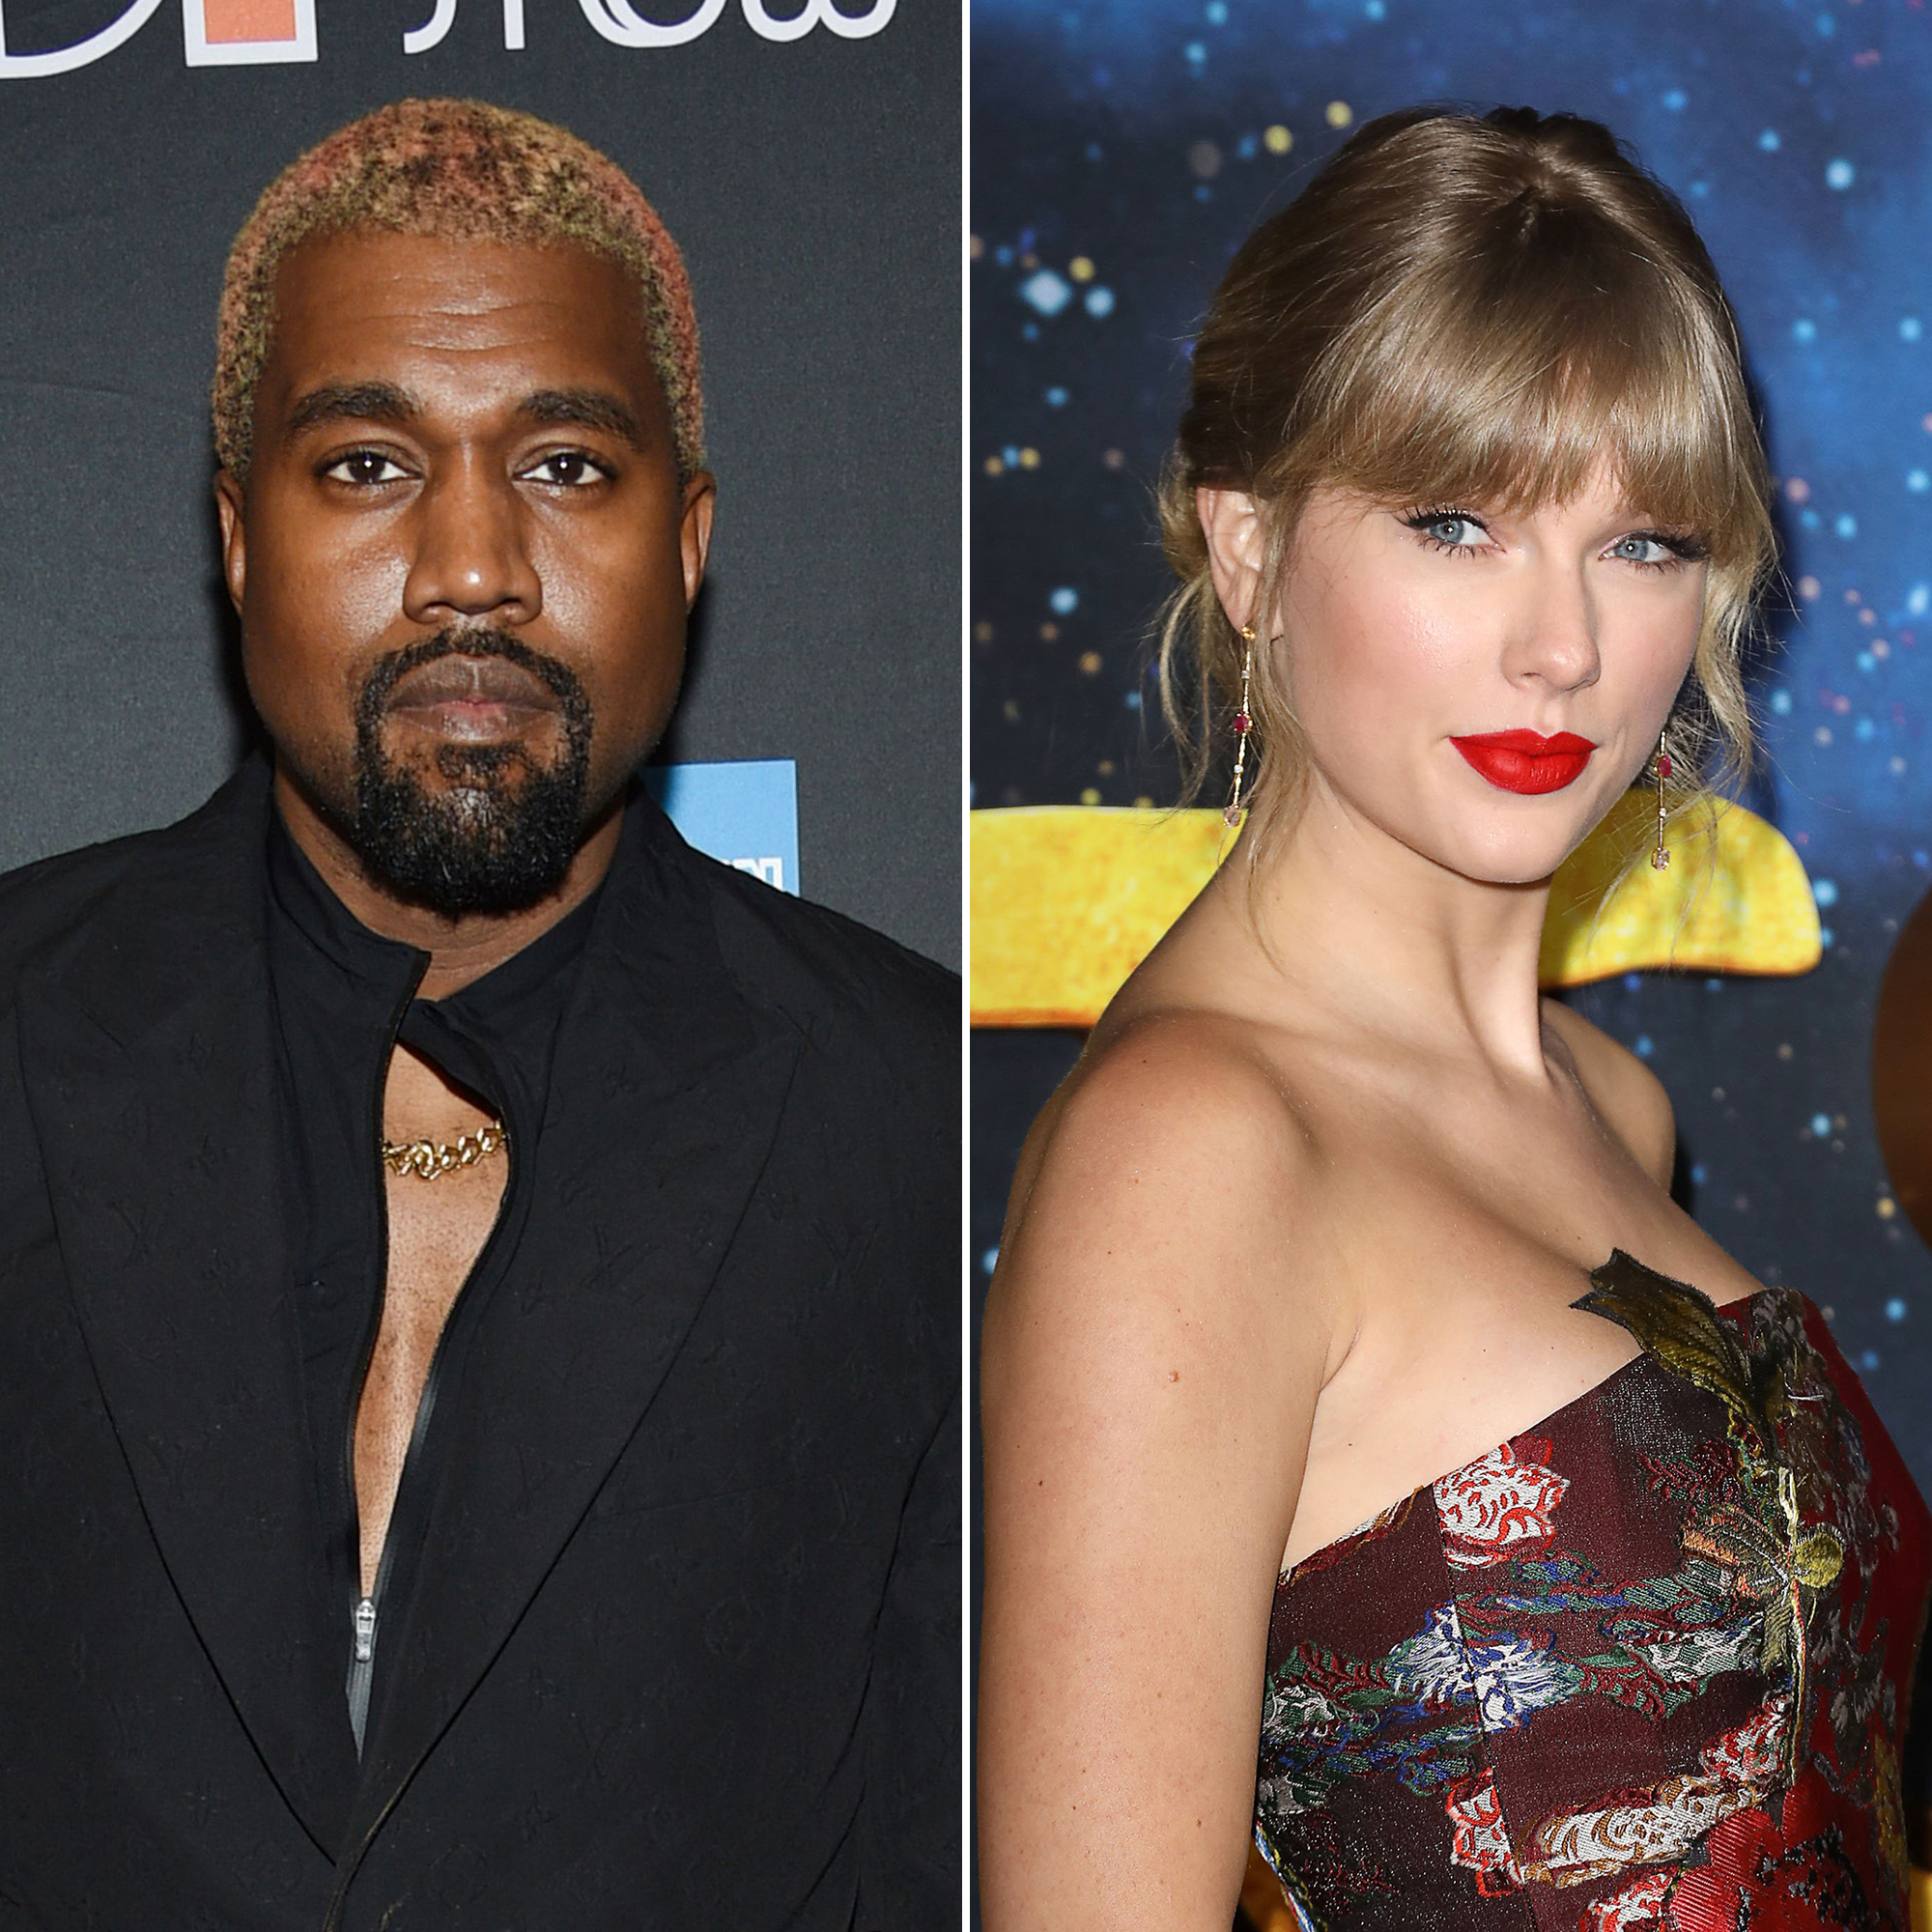 Taylor Swift Sexiest Moments - Kanye West Vows to Get Taylor Swift Her Music Back Amid Twitter Rant